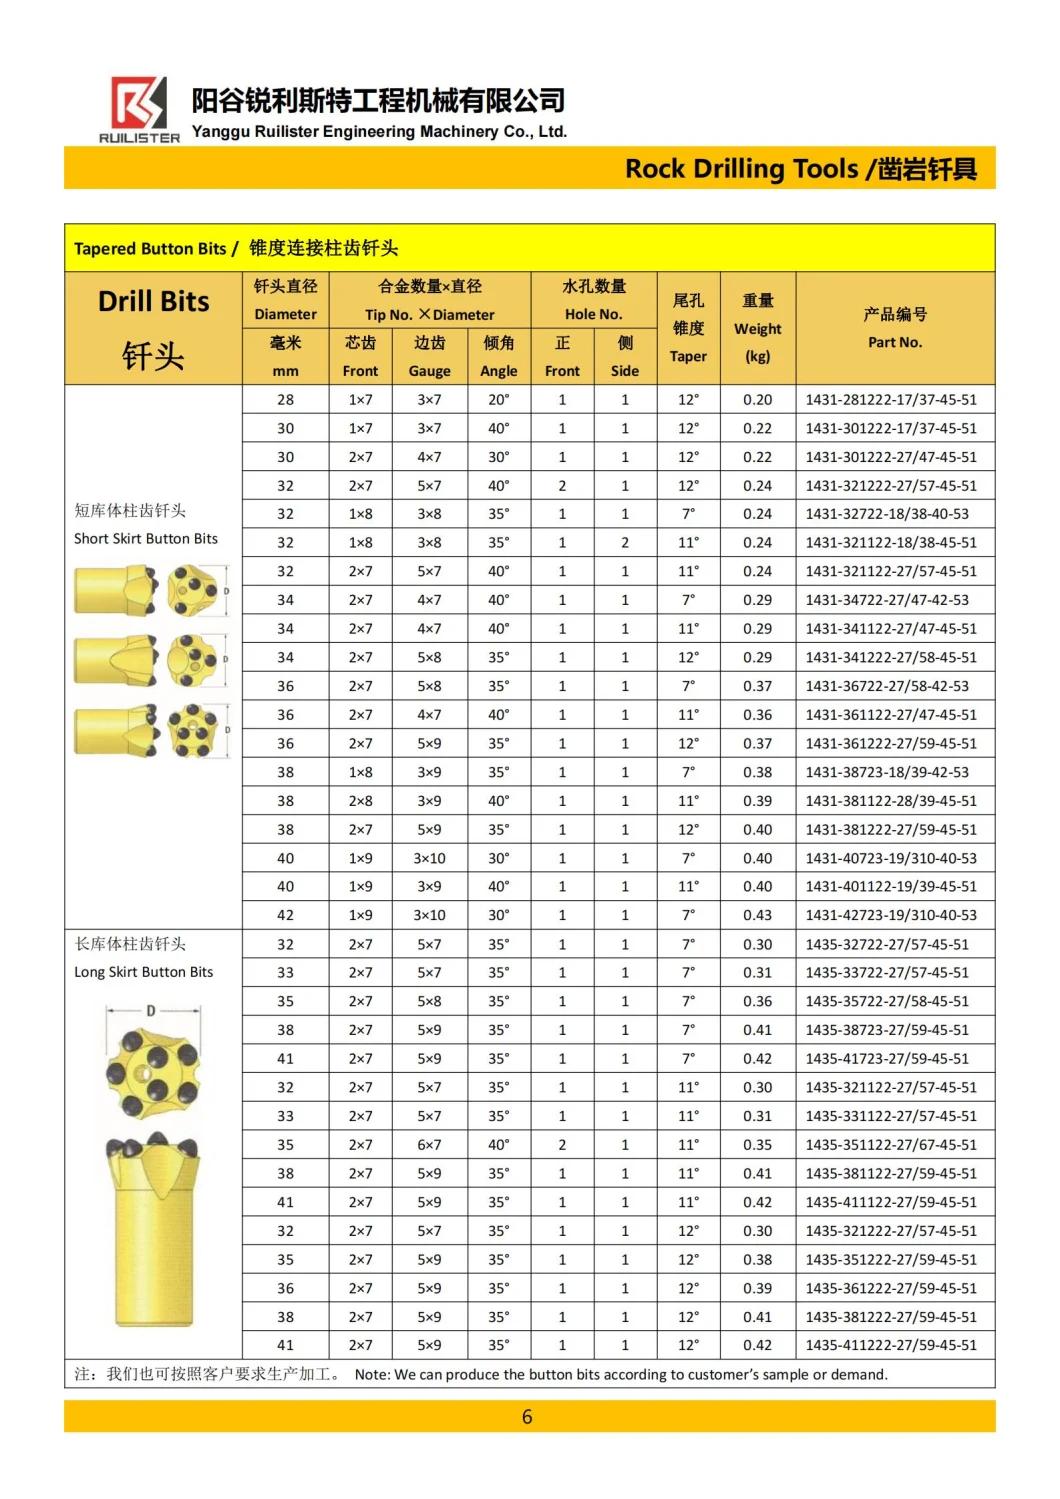 45mm 50mm 12 Degree Taper Button Bits Manufacturers in China